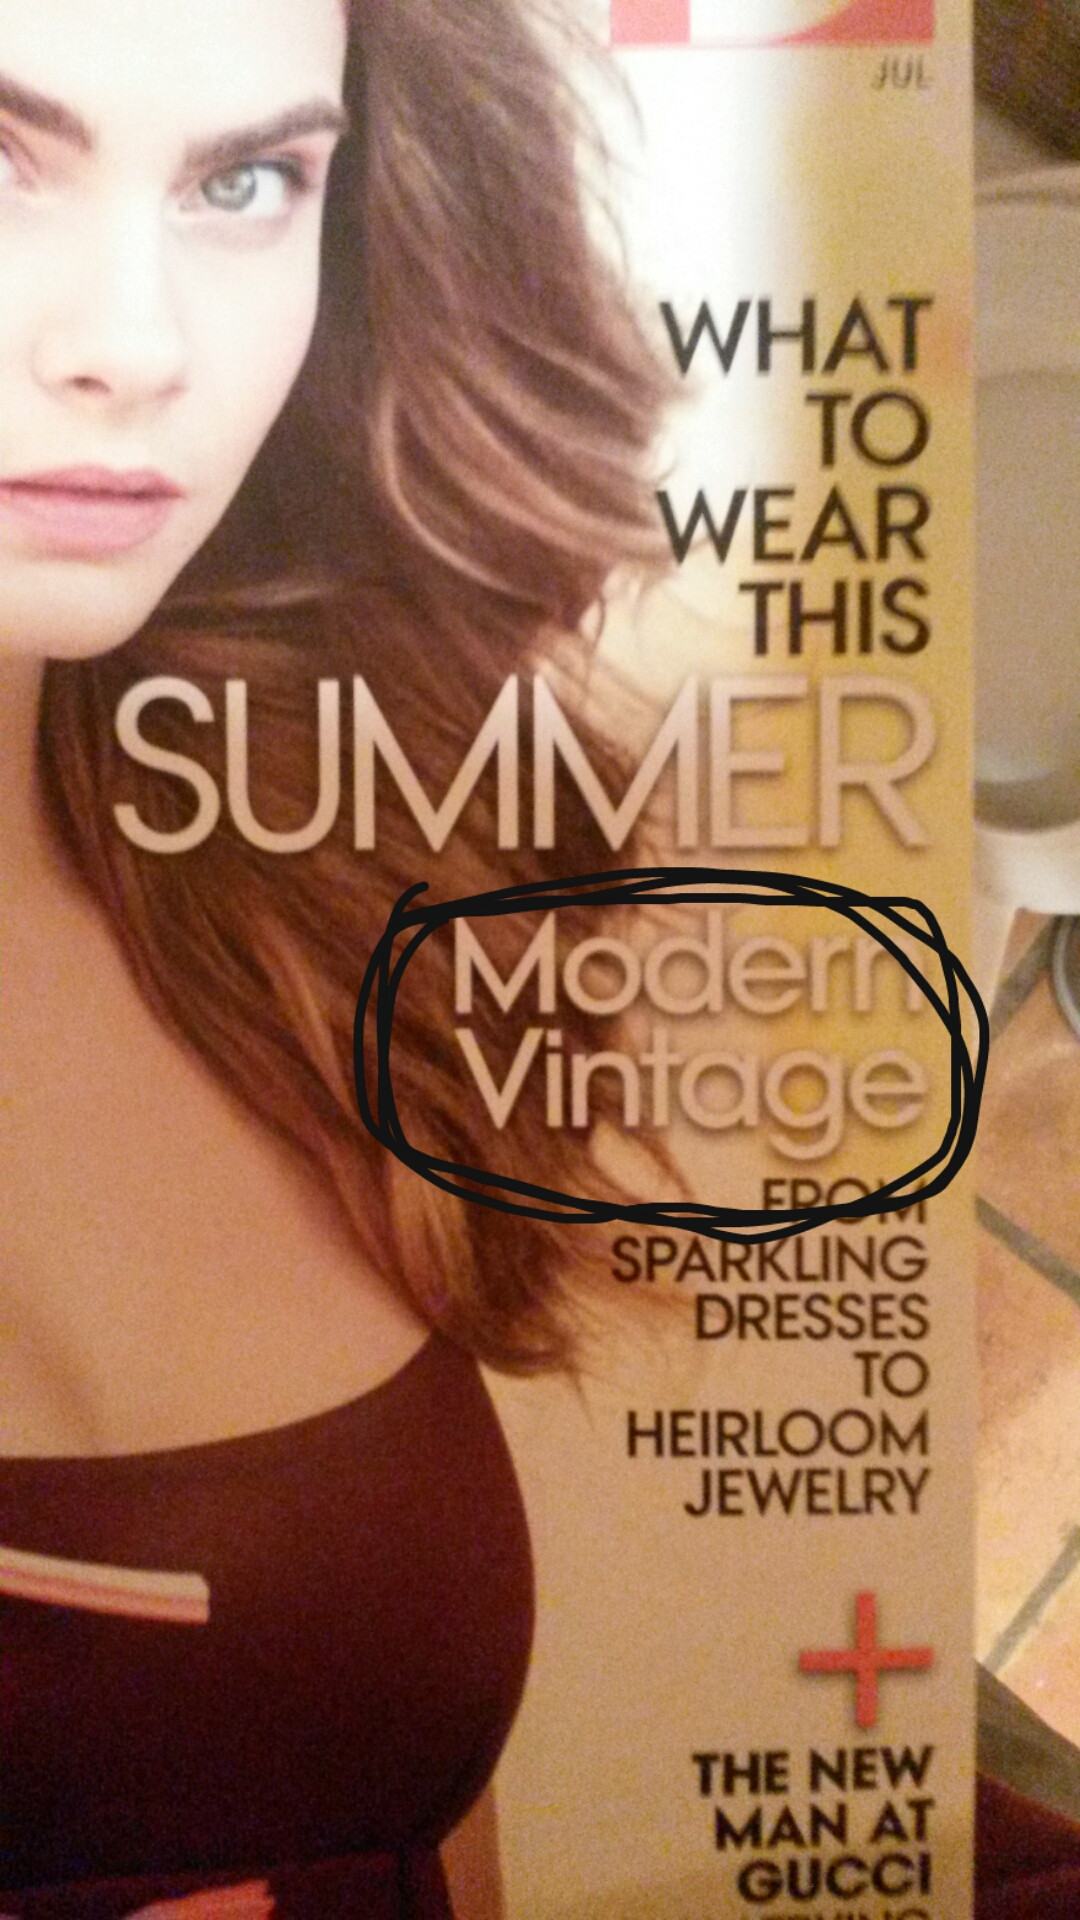 hair coloring - What To Wear This Summer Moden Vintage Sro Sparkling Dresses Heirloom Jewelry To The New Man At Gucci